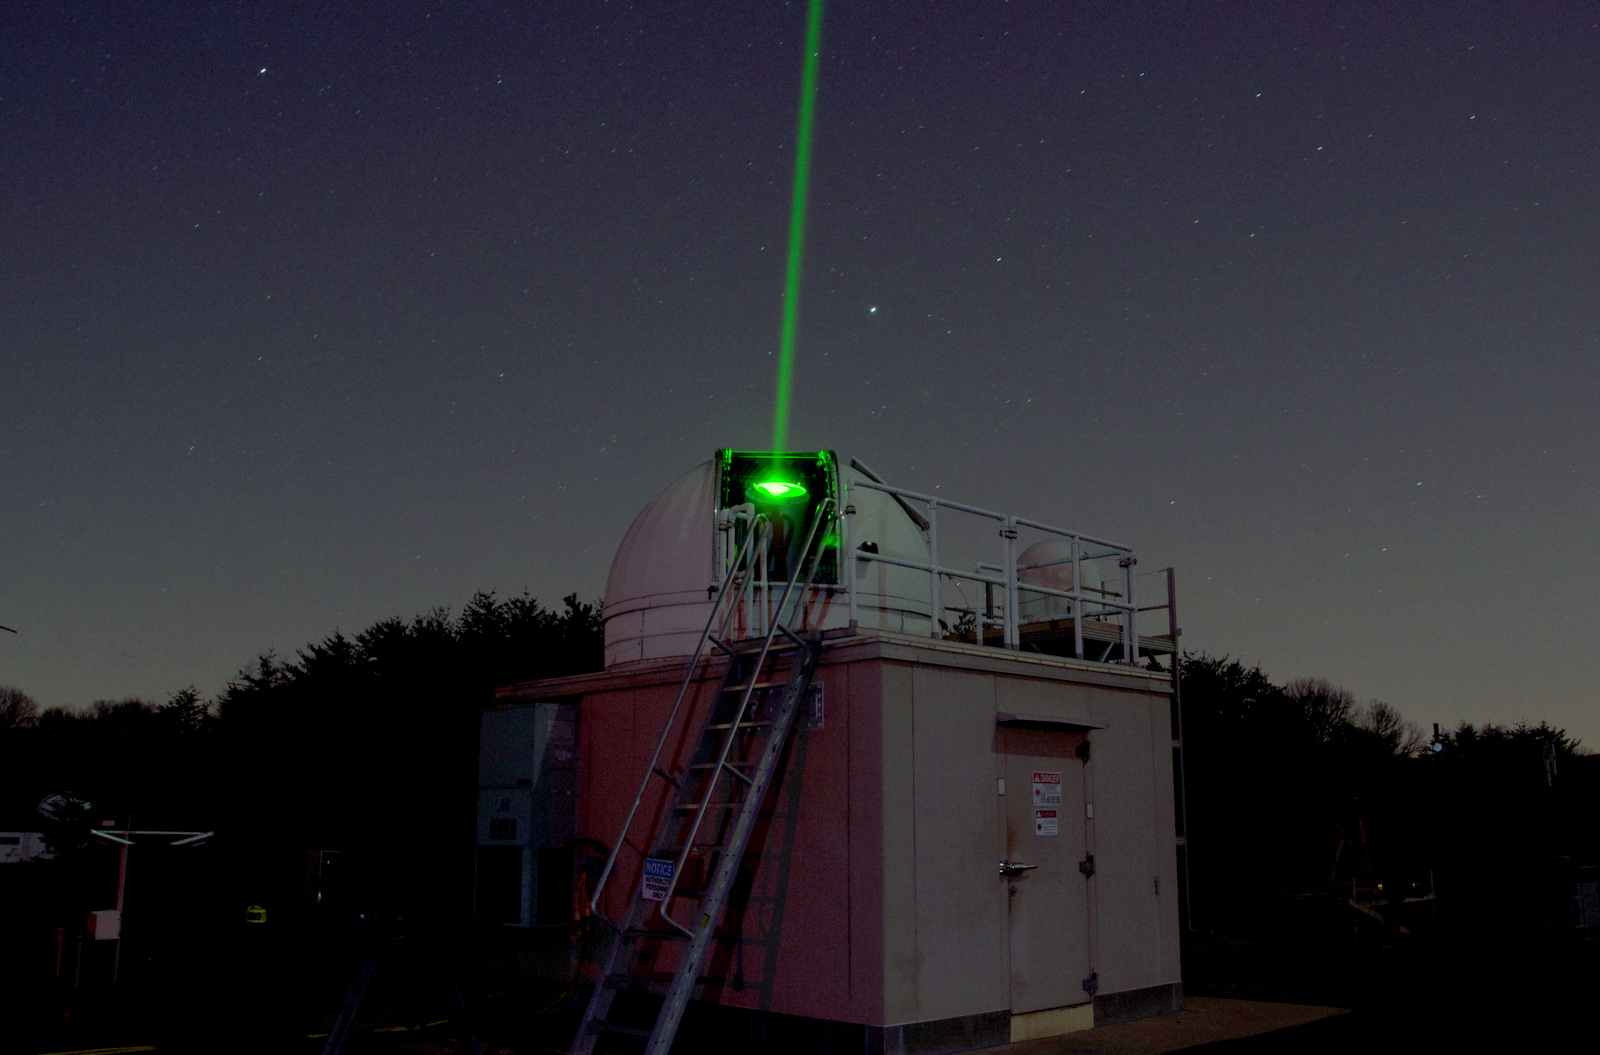 The Next Generation Satellite Laser Ranging station, which has a white metal dome, with a small segment open. A green laser beam shoots out of the dome opening toward the night sky.